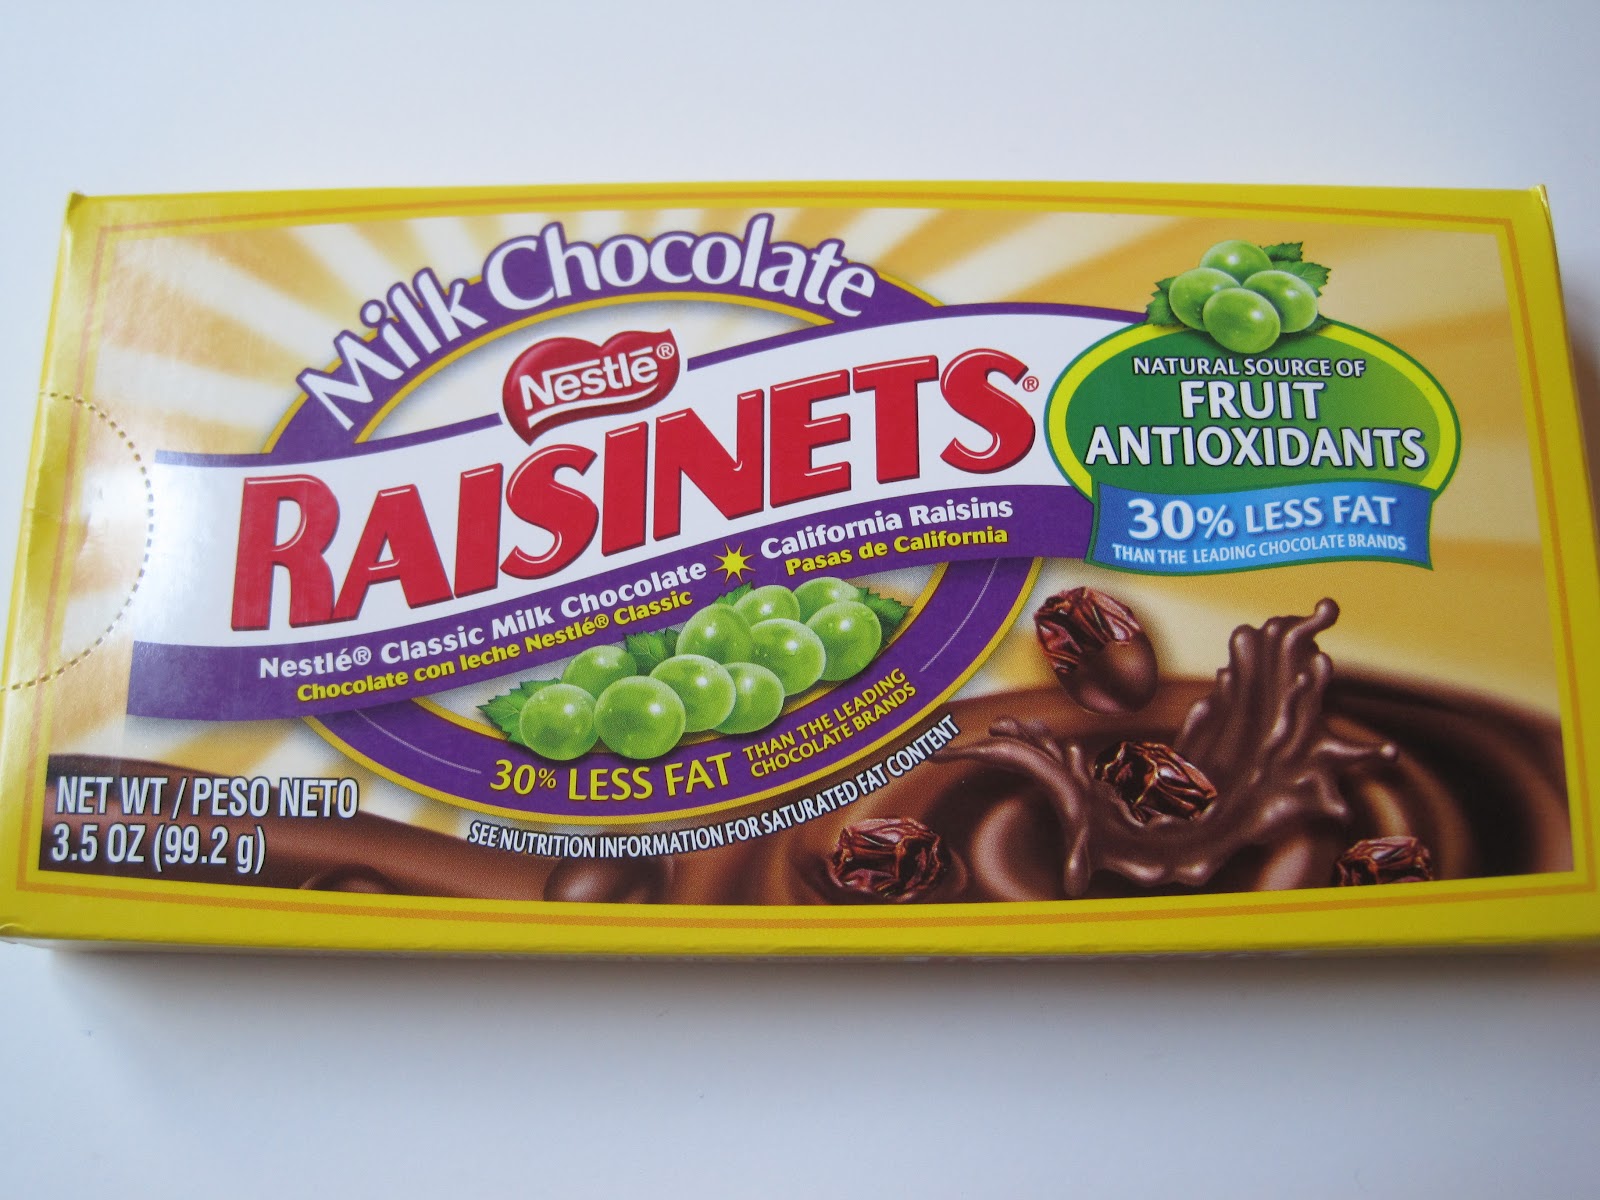 A Large Box Of Raisinets Has How Many Calories